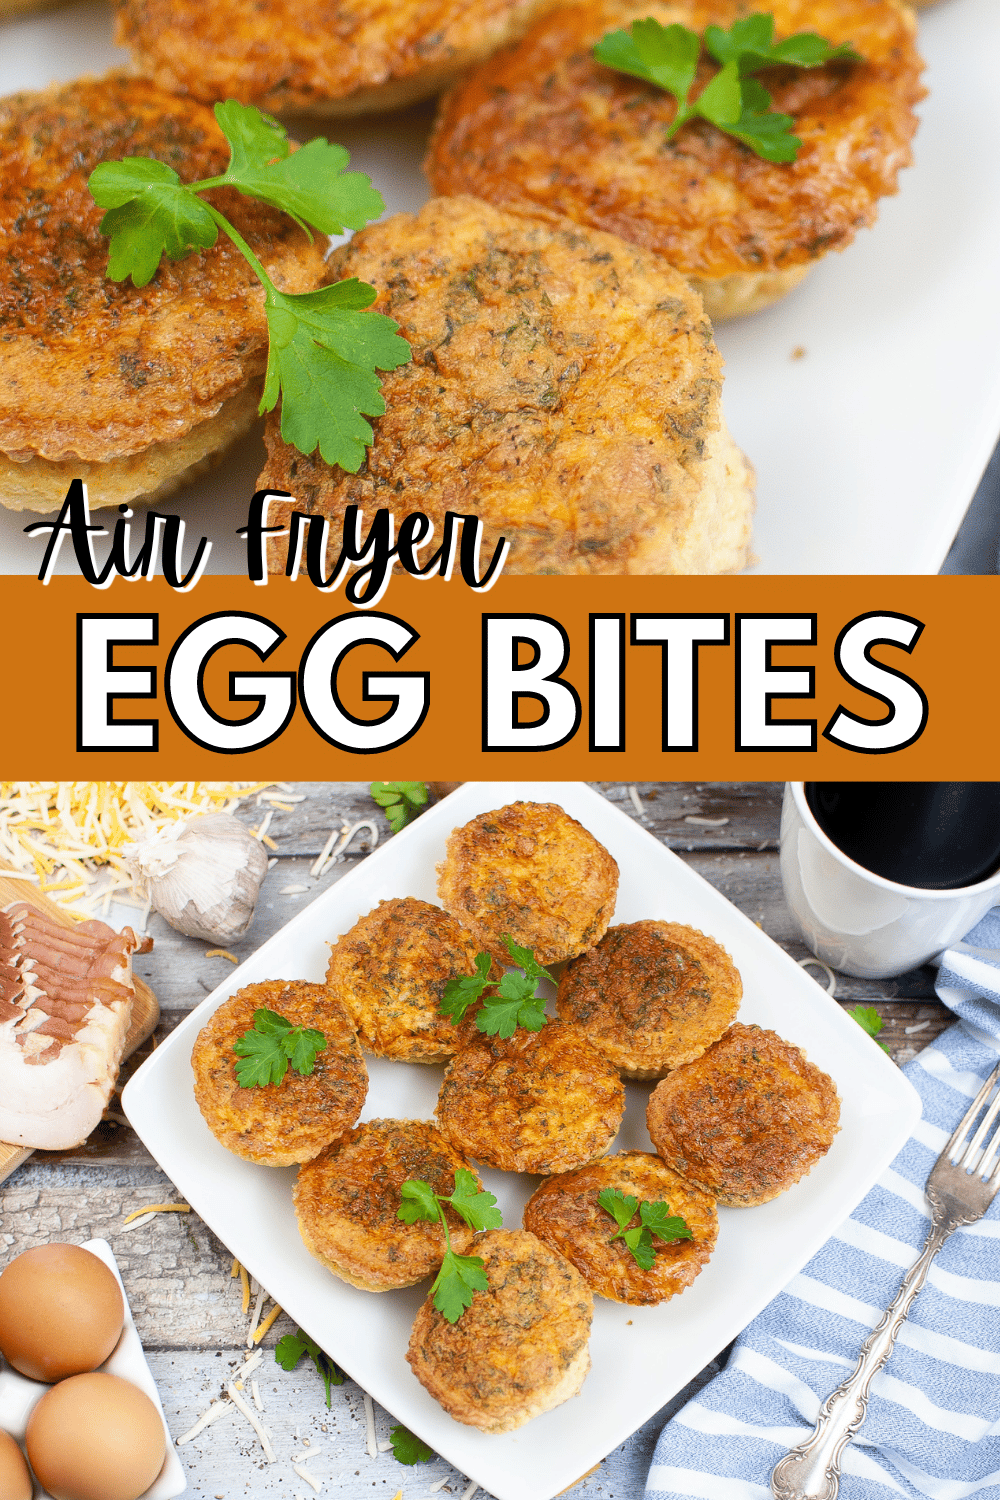 Air Fryer Egg Bites are a quick and easy breakfast that can be made ahead of time and reheated on busy mornings. They're packed with flavor! #airfryereggbites #airfryer #eggbites #breakfast #recipe via @wondermomwannab